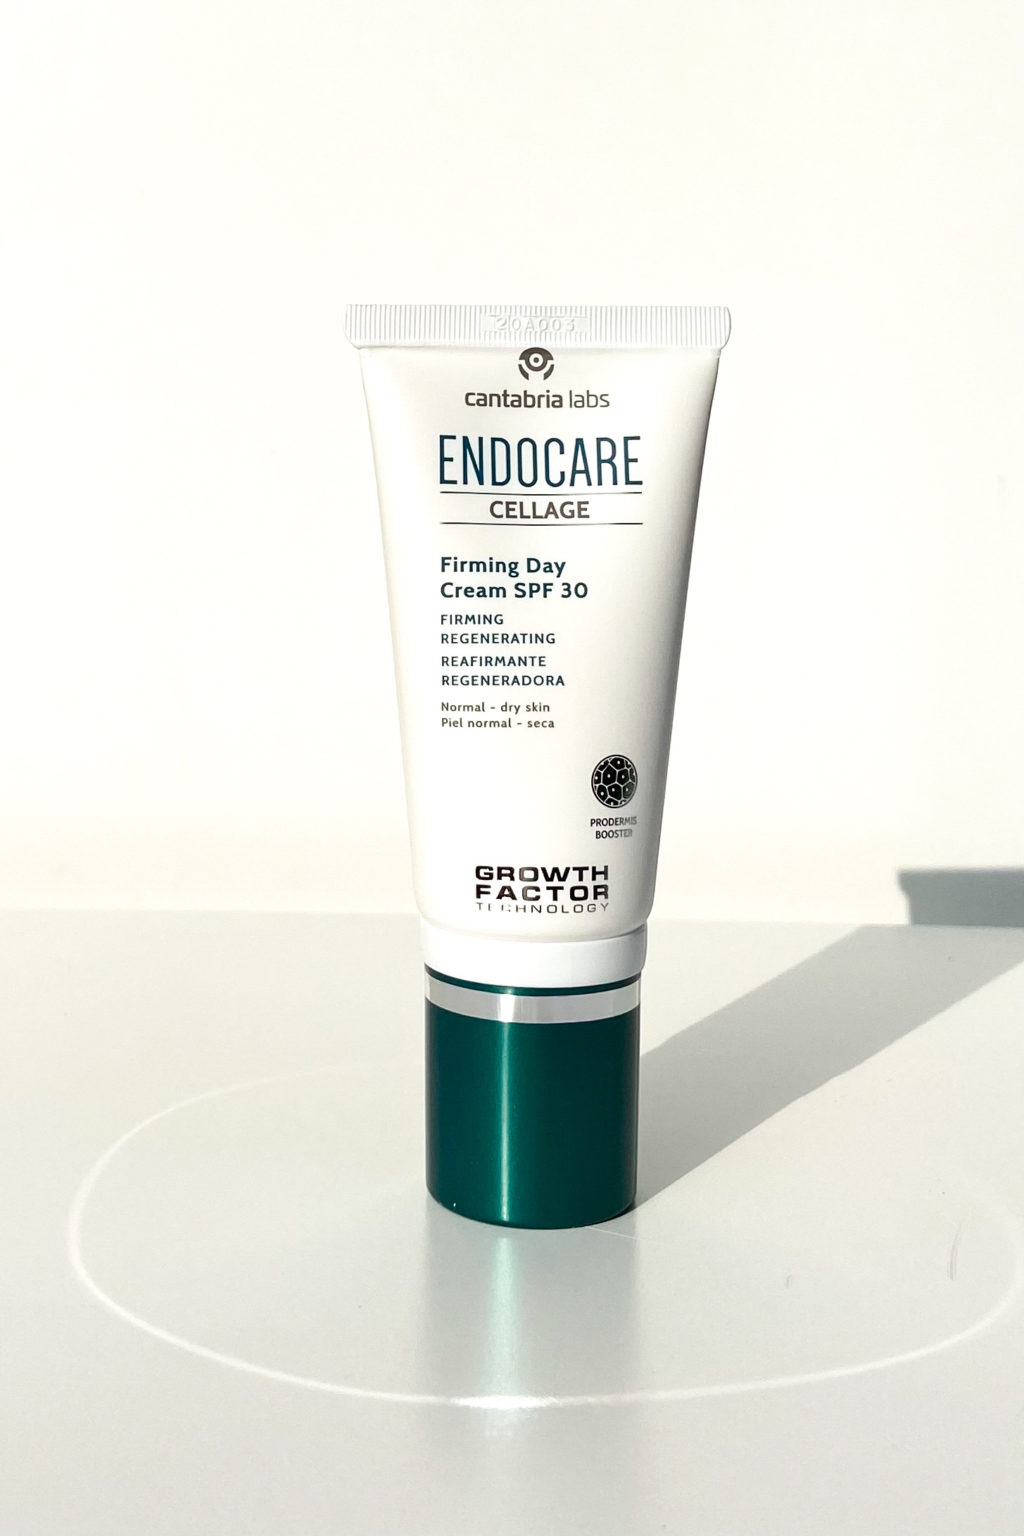 ENDOCARE Cellage Firming Day Cream SPF30 50ml